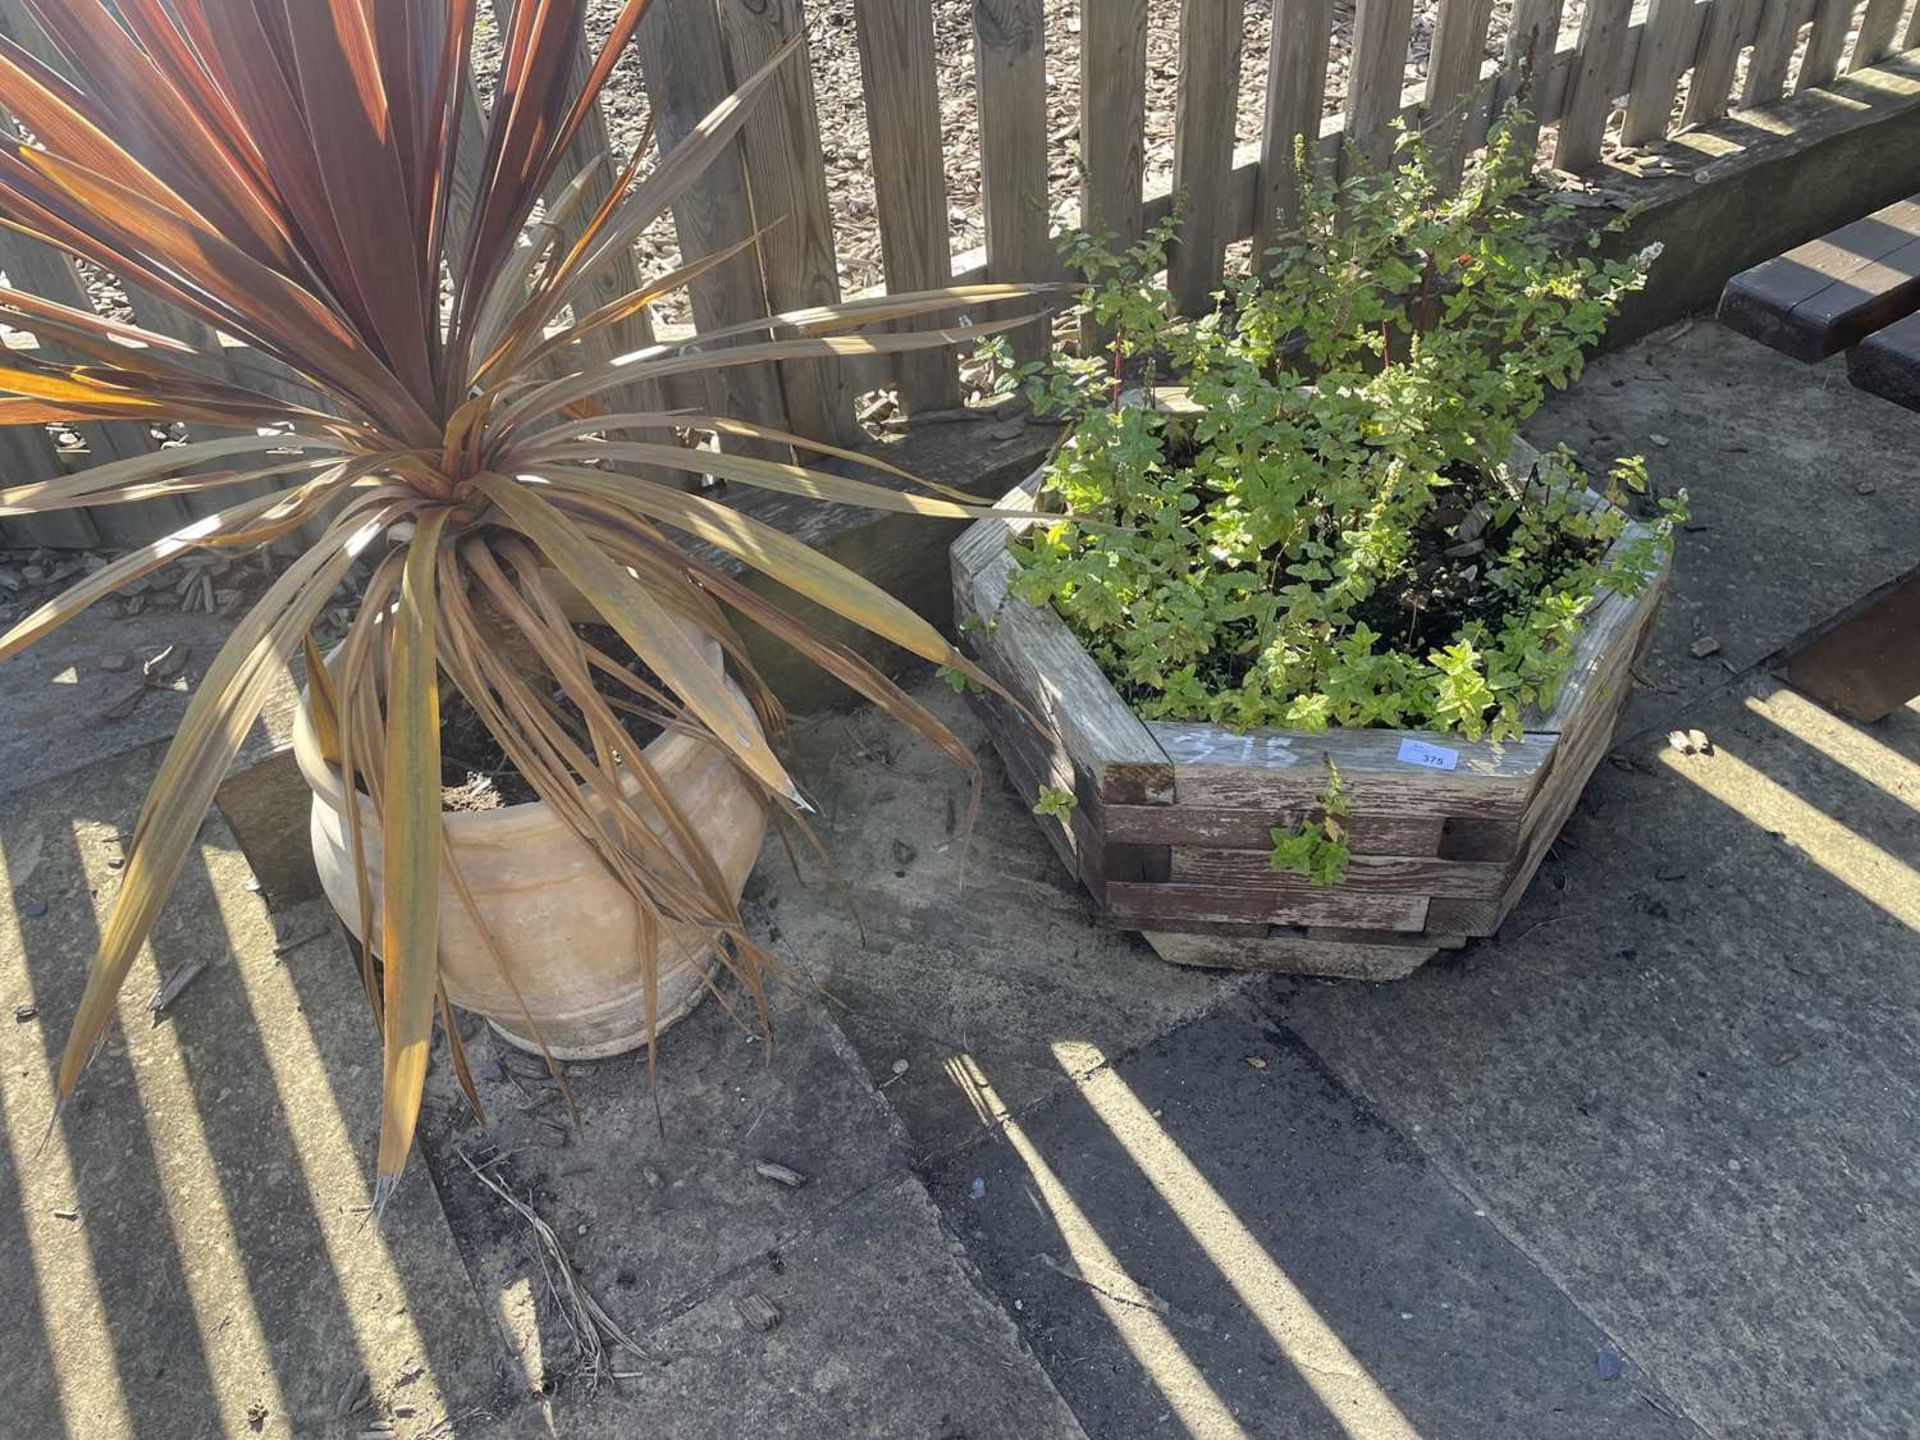 2 planters including contents